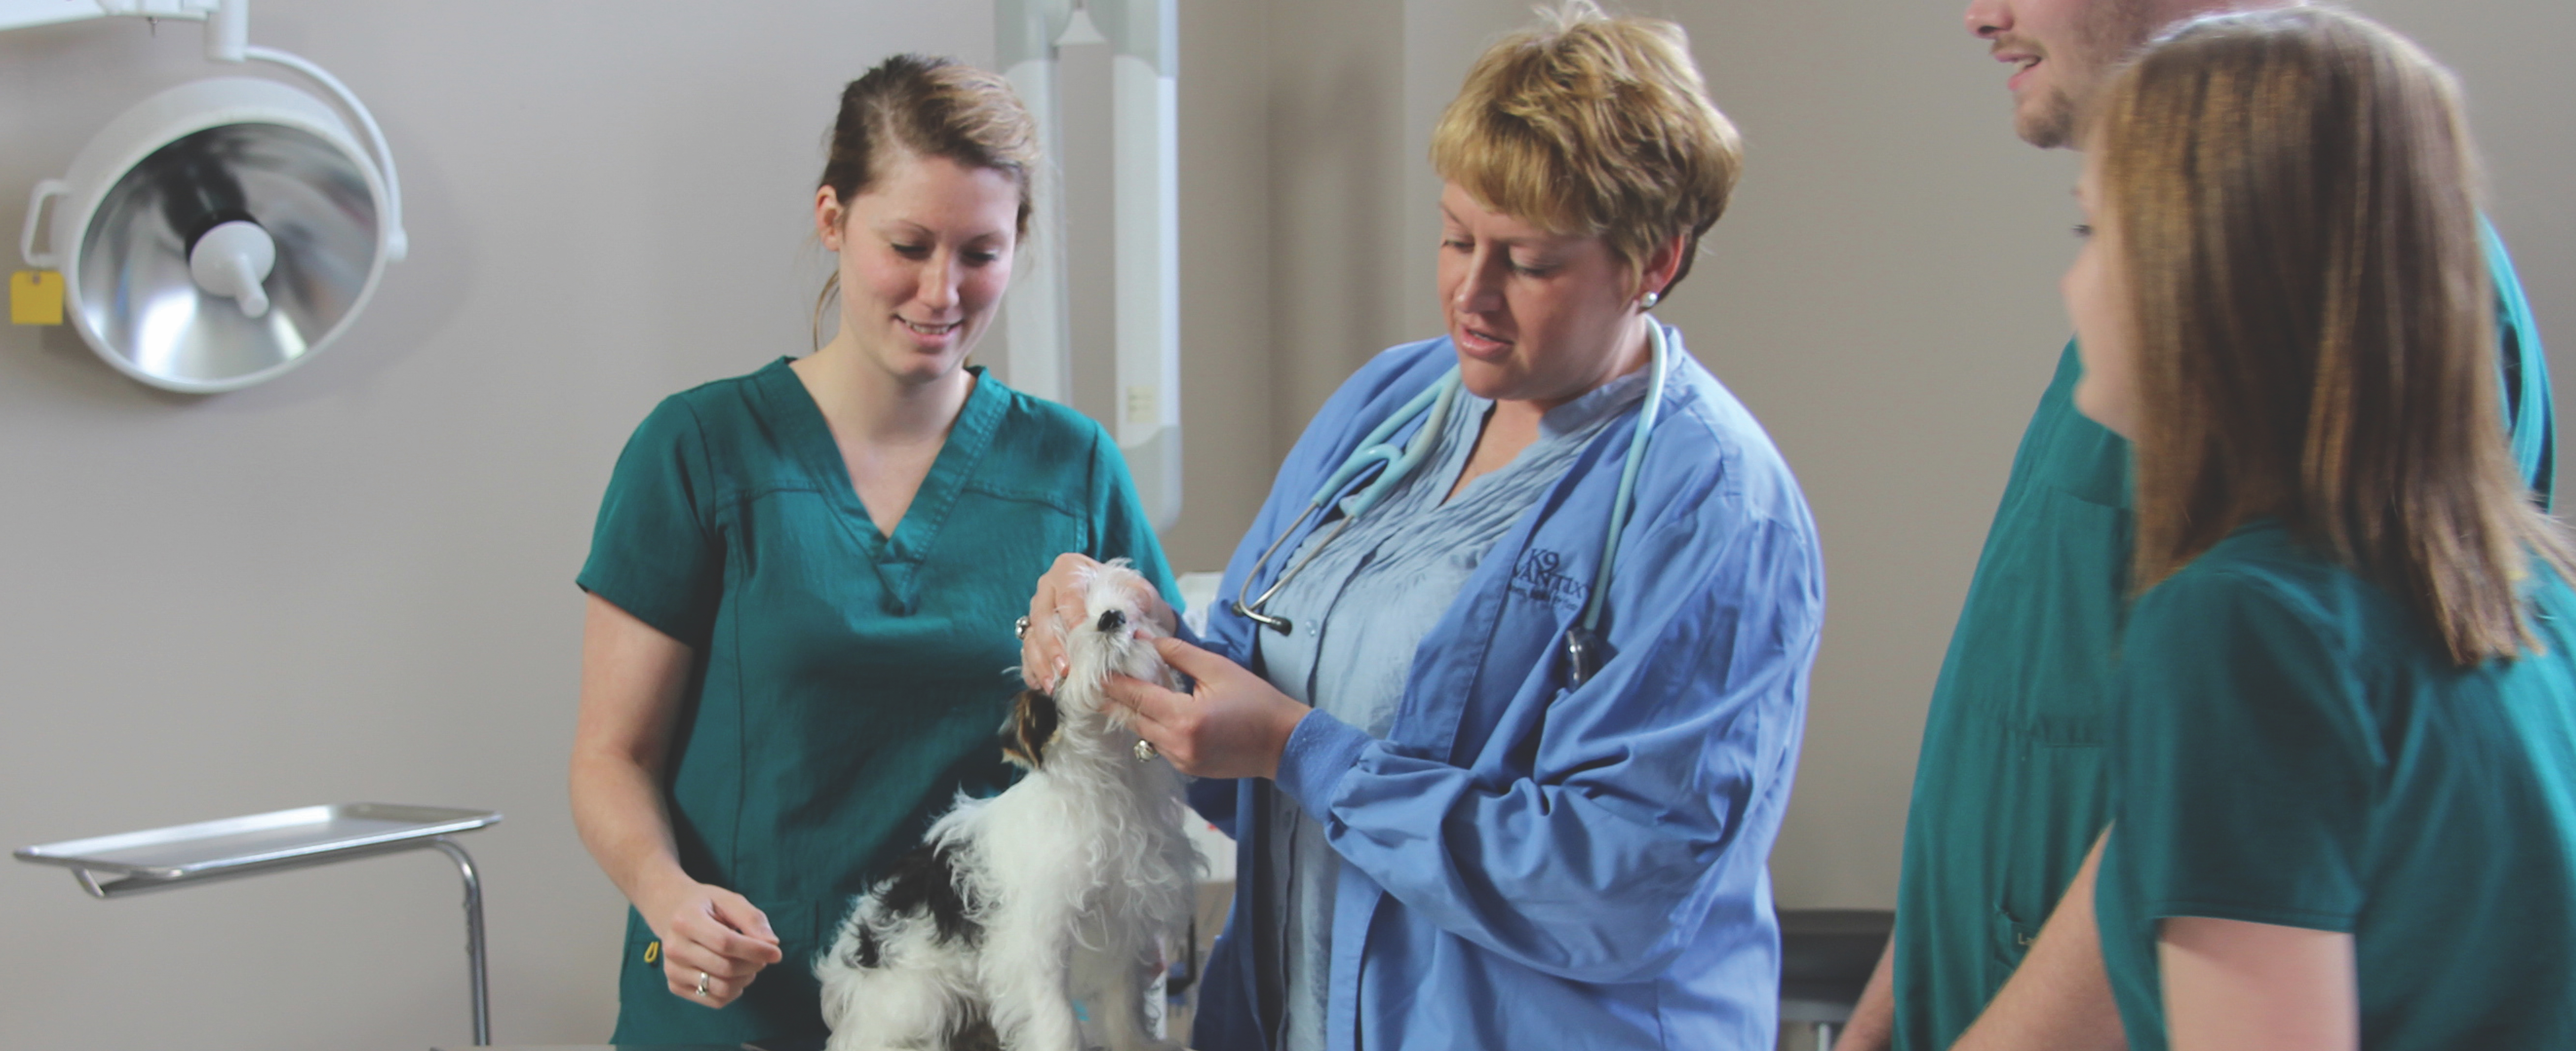 Veterinary Technology AAS = Associate of Applied Science